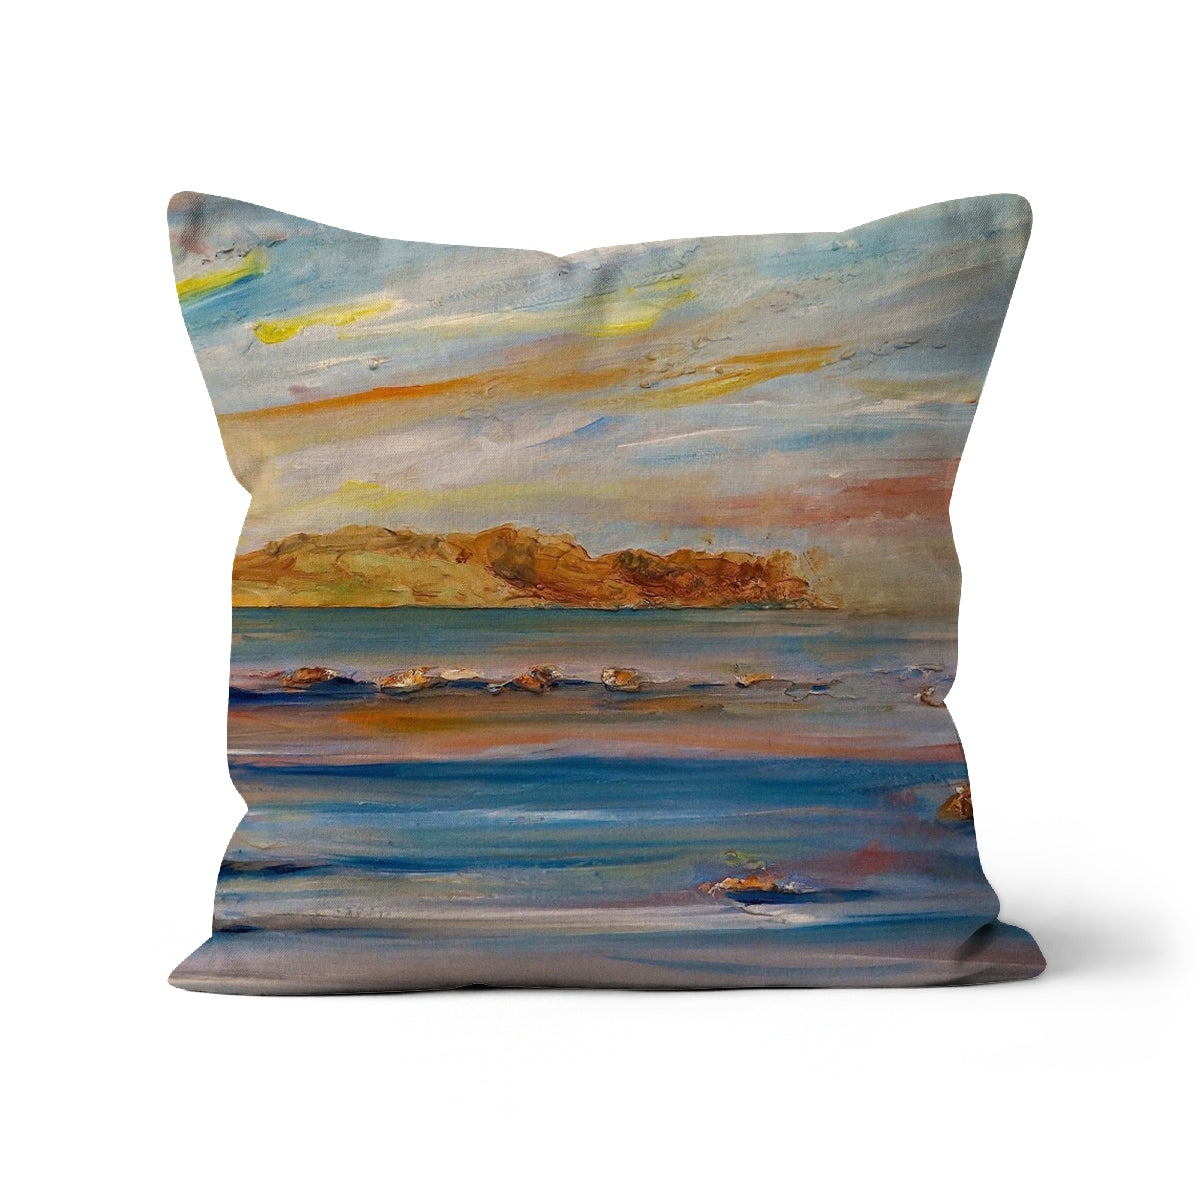 Tiree Dawn Art Gifts Cushion-Cushions-Hebridean Islands Art Gallery-Canvas-24"x24"-Paintings, Prints, Homeware, Art Gifts From Scotland By Scottish Artist Kevin Hunter